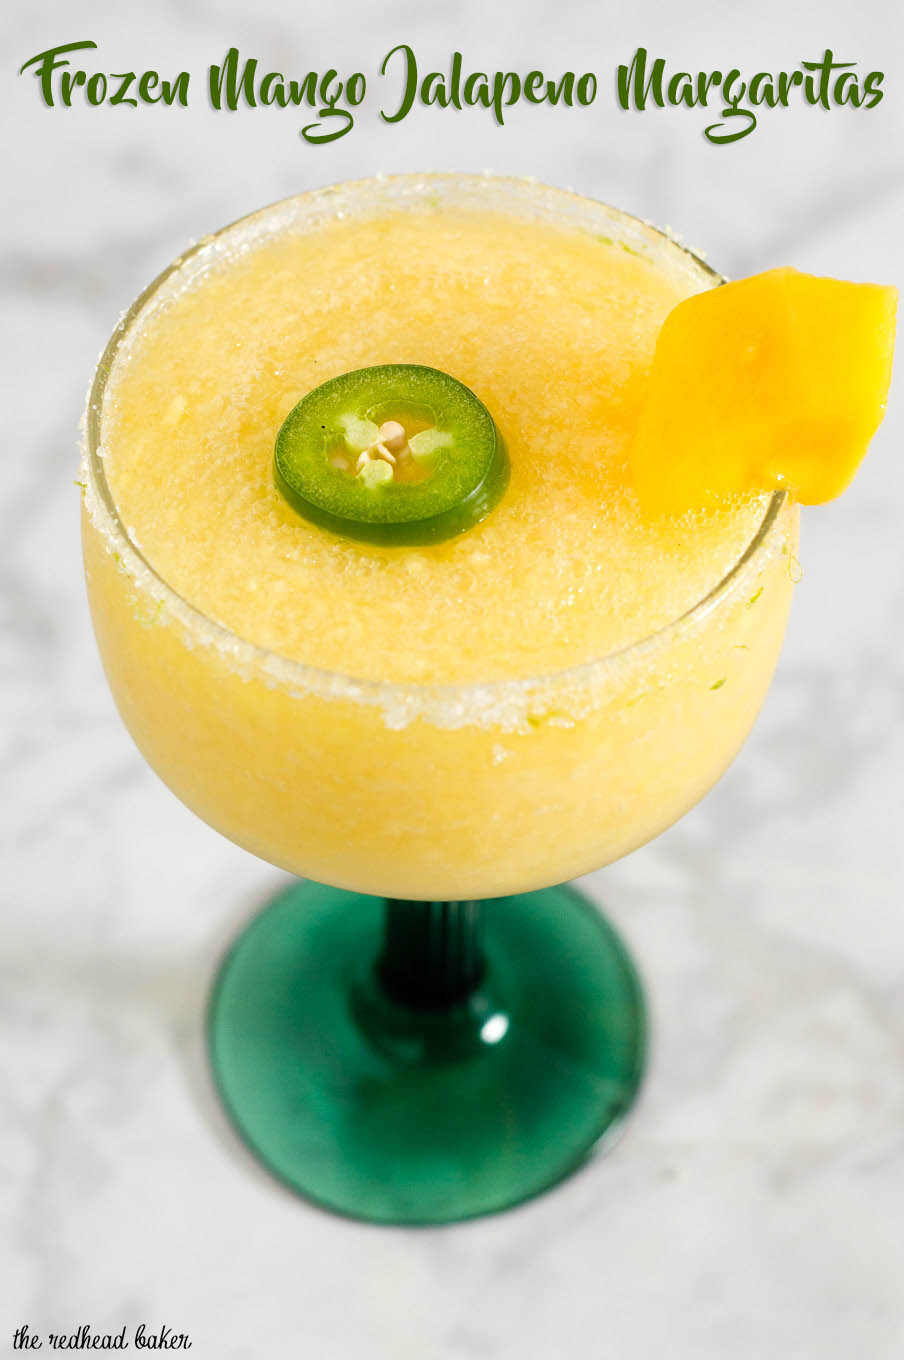 Get a Taste of Adventure with frozen mango jalapeno margaritas! Blend Nature’s Touch organic mango with jalapeno-infused tequila, triple sec and lime juice. #FlavorAdventure #ad